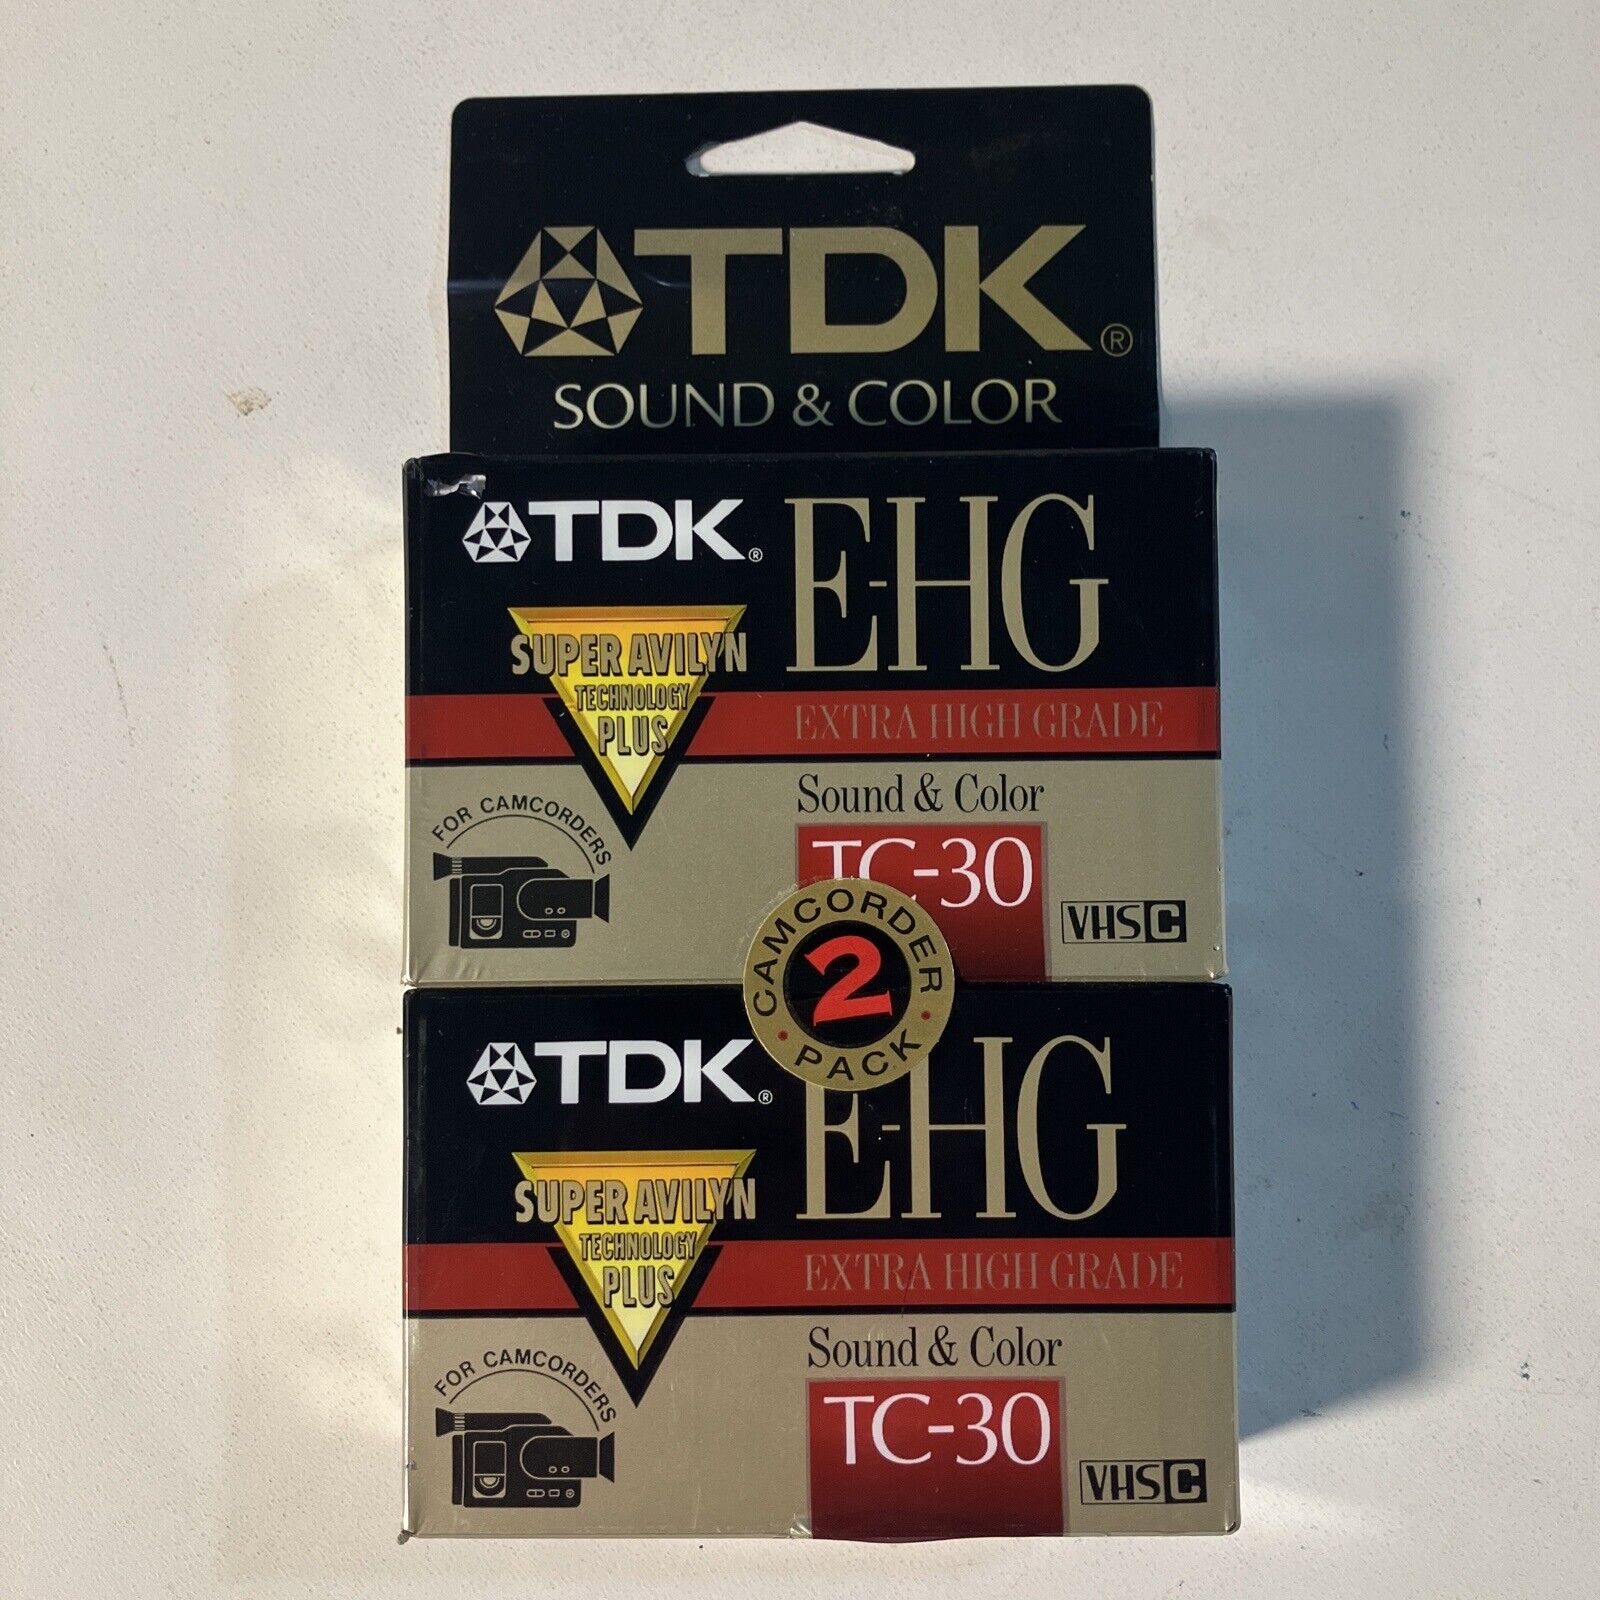 TDK E-HG TC-30 Extra High Grade VHS-C Camcorder Tapes New Sealed 2 Pack